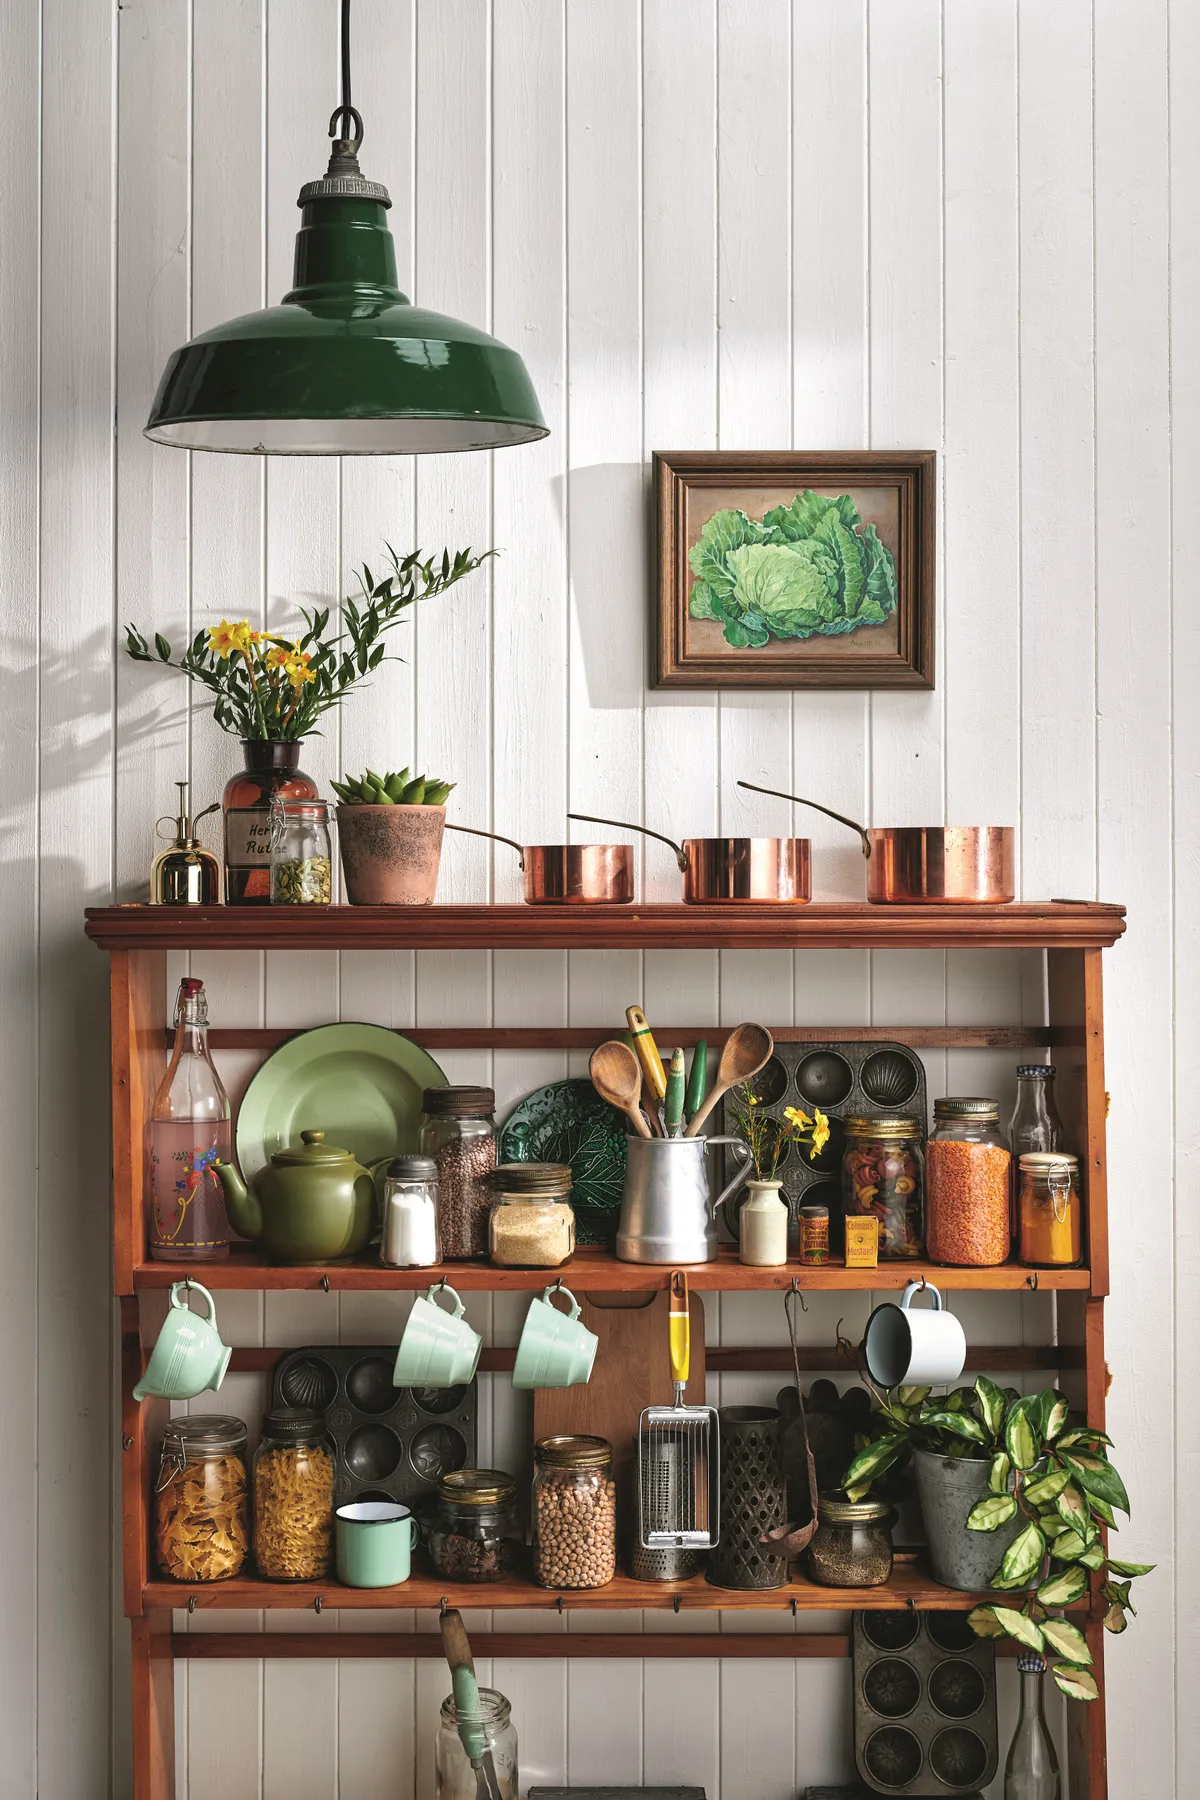 A vintage shelving unit is used to display copper pans and jars of larder essentials in a kitchen.